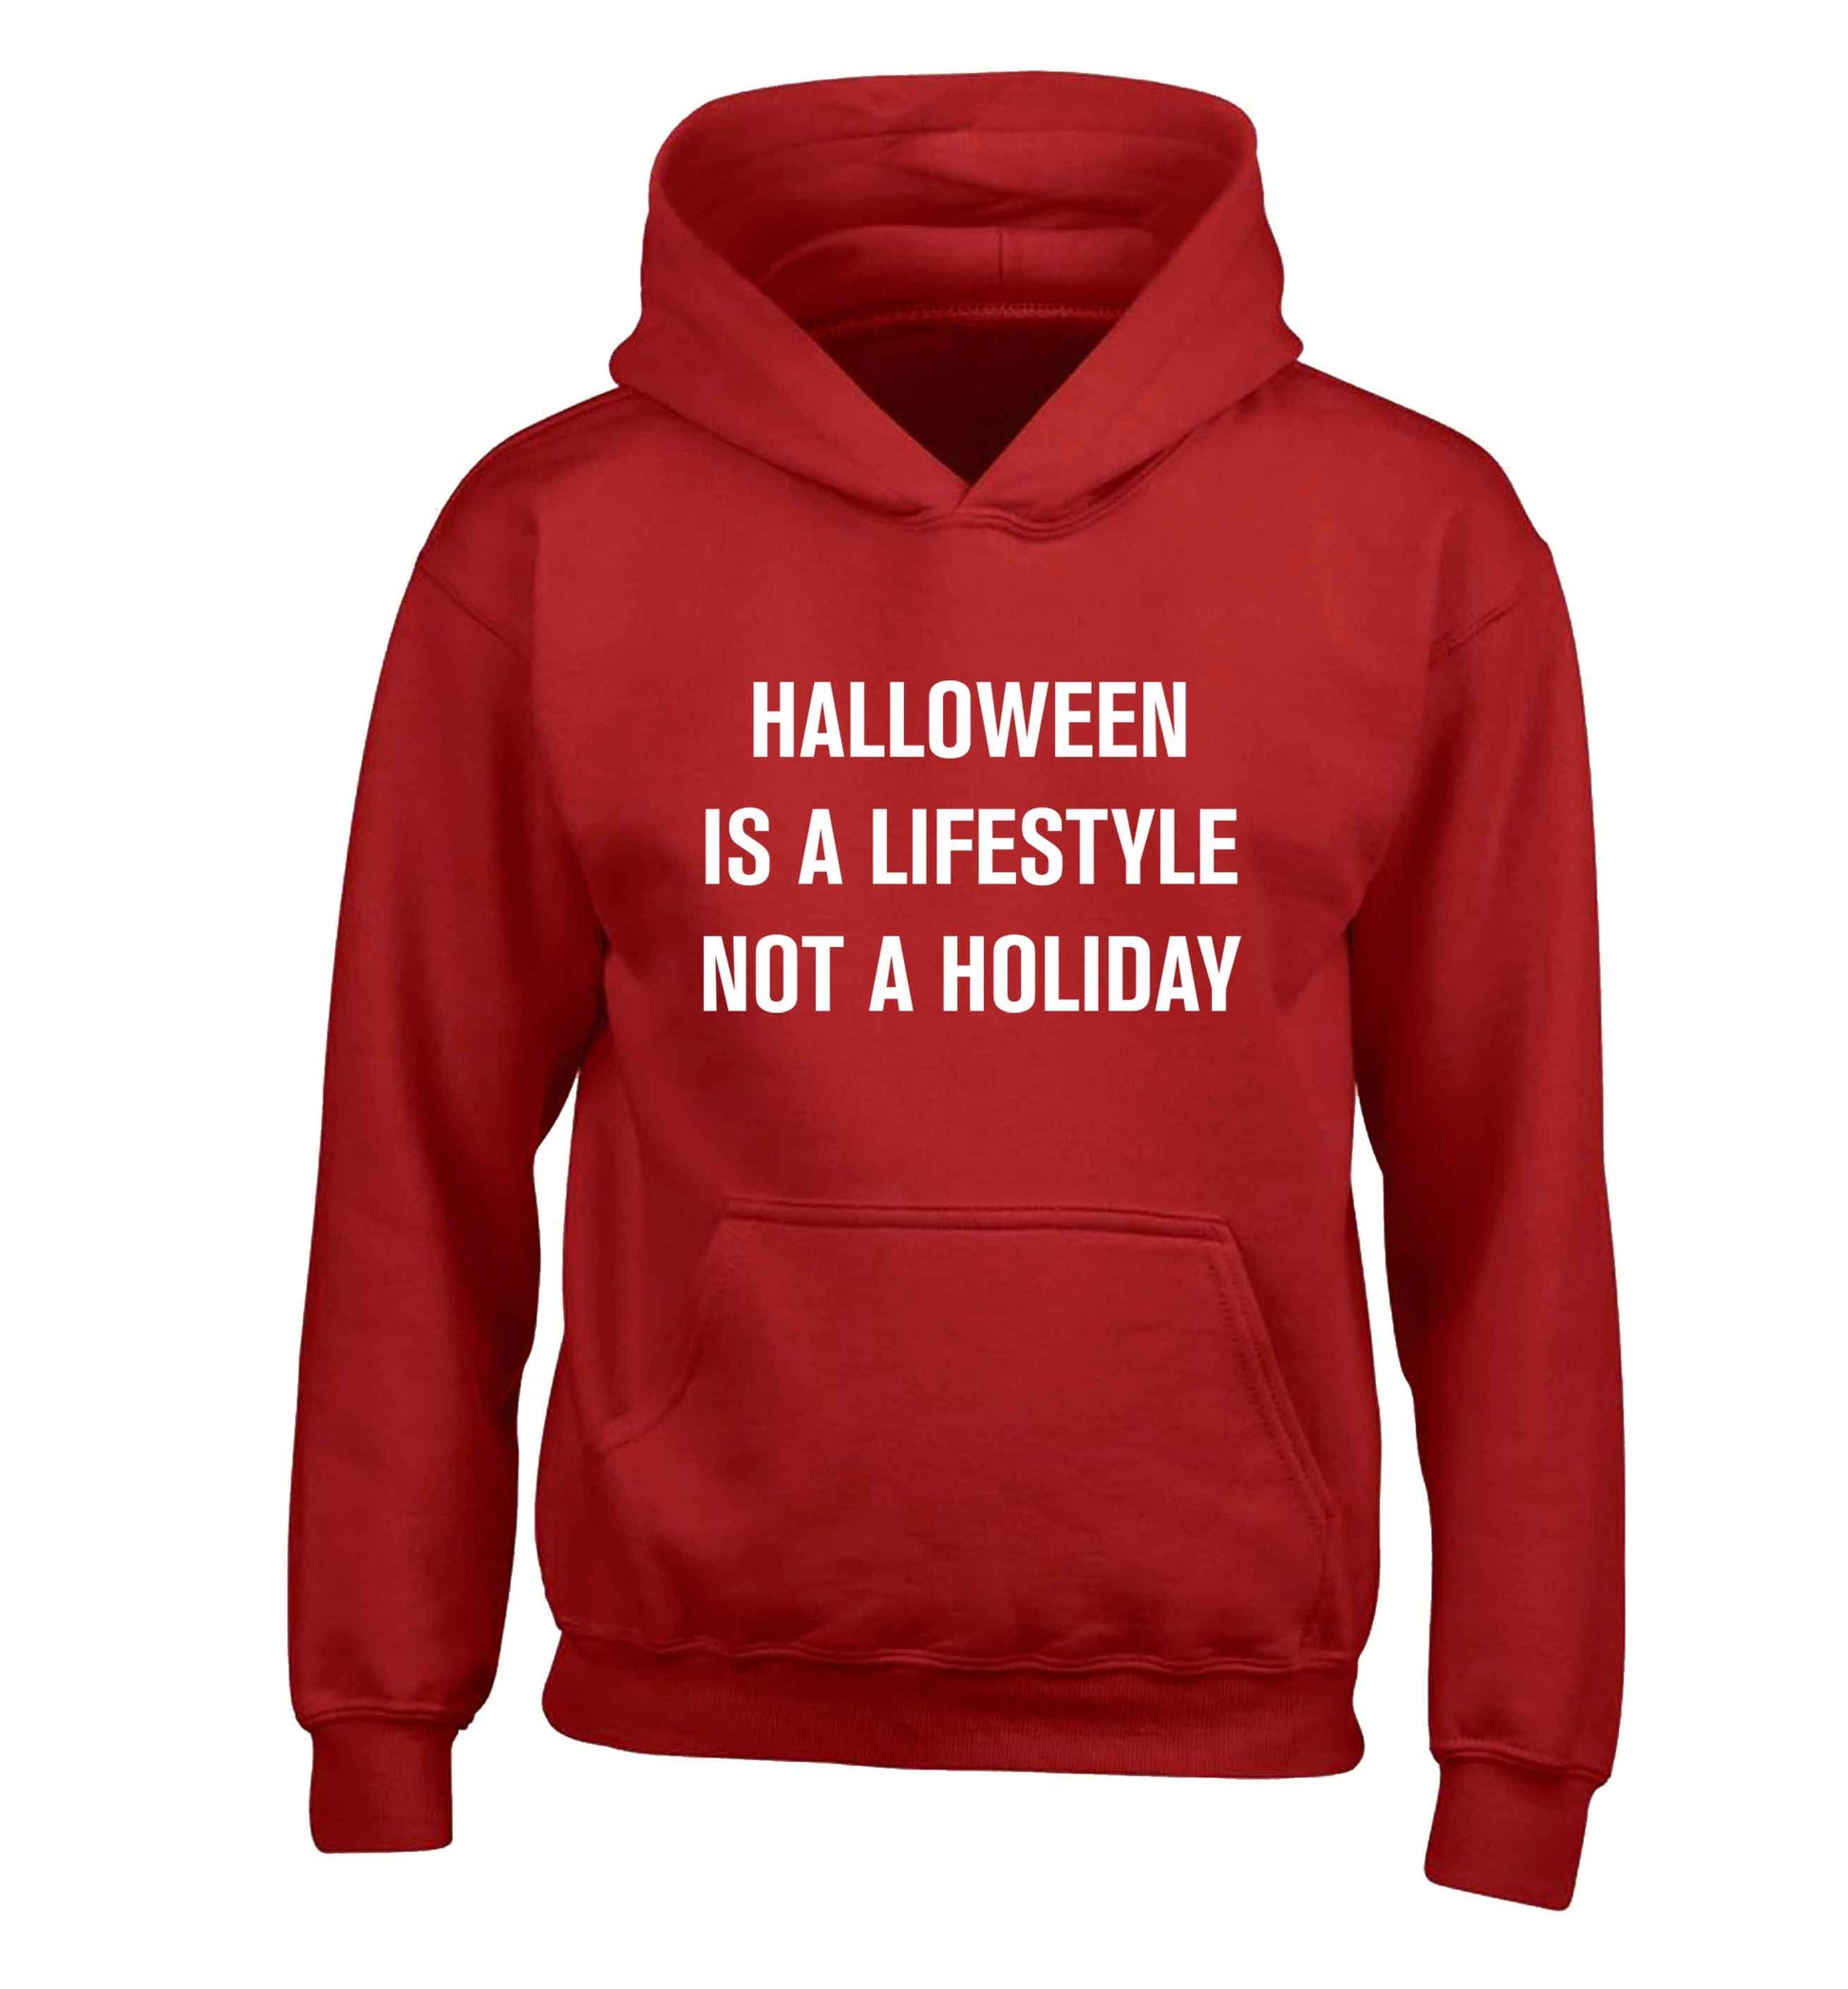 Halloween is a lifestyle not a holiday children's red hoodie 12-13 Years